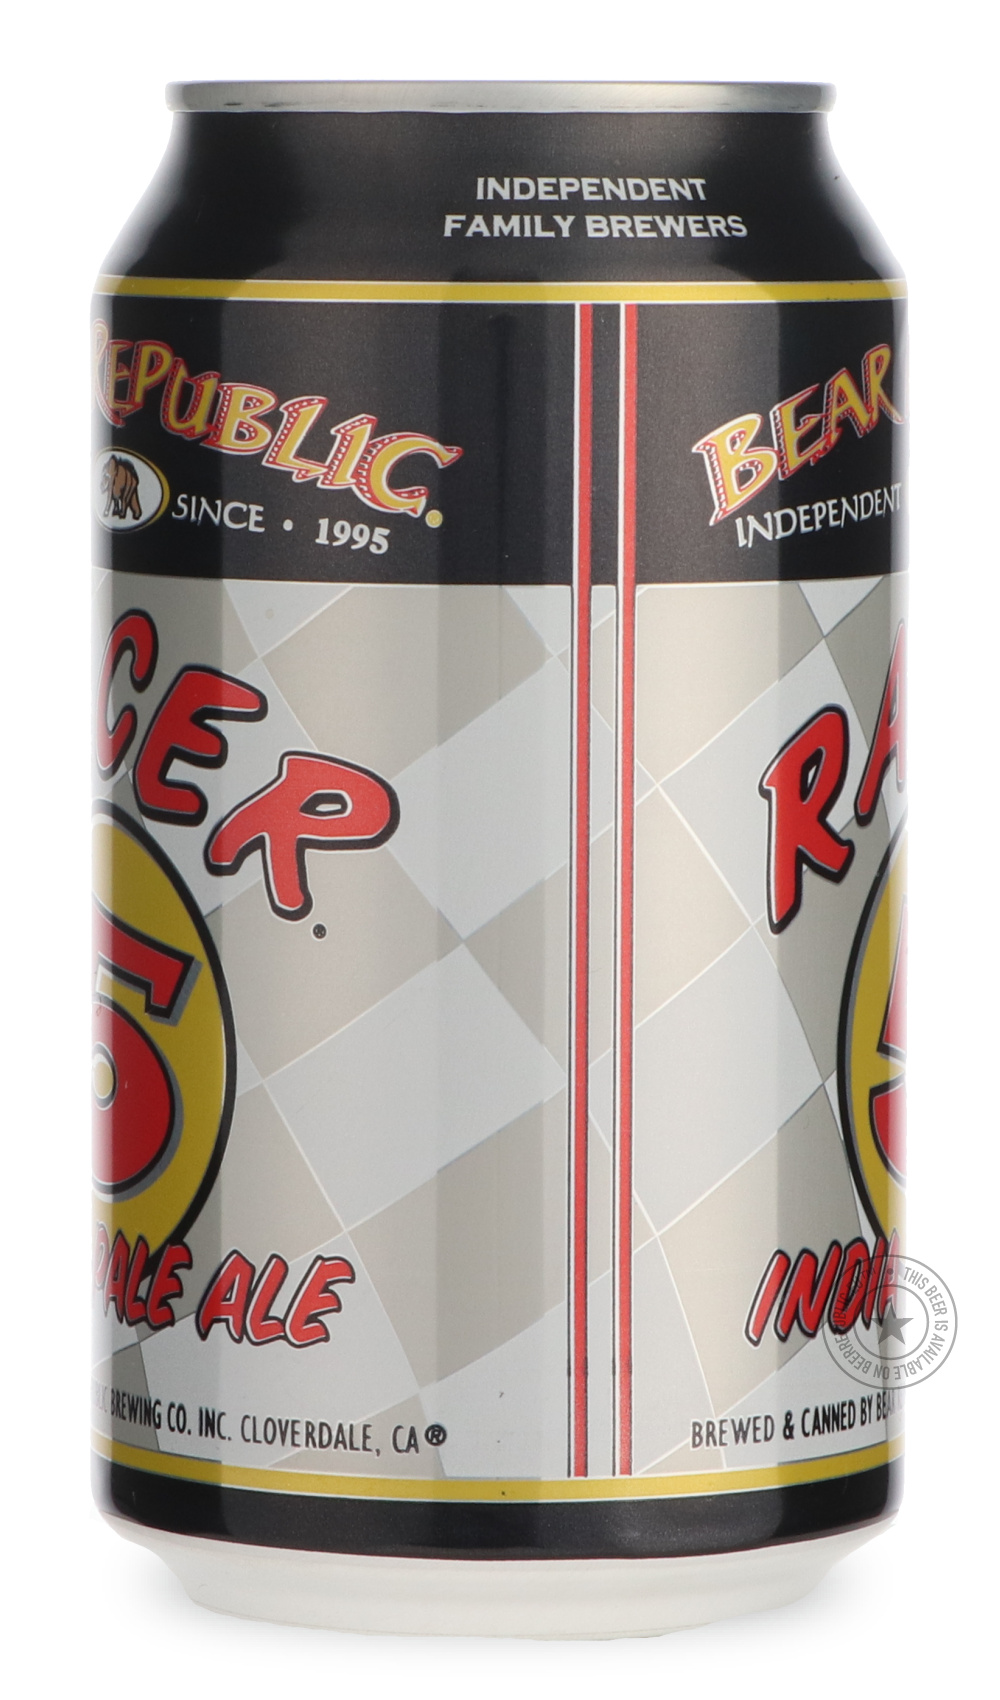 -Bear Republic- Racer 5-IPA- Only @ Beer Republic - The best online beer store for American & Canadian craft beer - Buy beer online from the USA and Canada - Bier online kopen - Amerikaans bier kopen - Craft beer store - Craft beer kopen - Amerikanisch bier kaufen - Bier online kaufen - Acheter biere online - IPA - Stout - Porter - New England IPA - Hazy IPA - Imperial Stout - Barrel Aged - Barrel Aged Imperial Stout - Brown - Dark beer - Blond - Blonde - Pilsner - Lager - Wheat - Weizen - Amber - Barley Wi